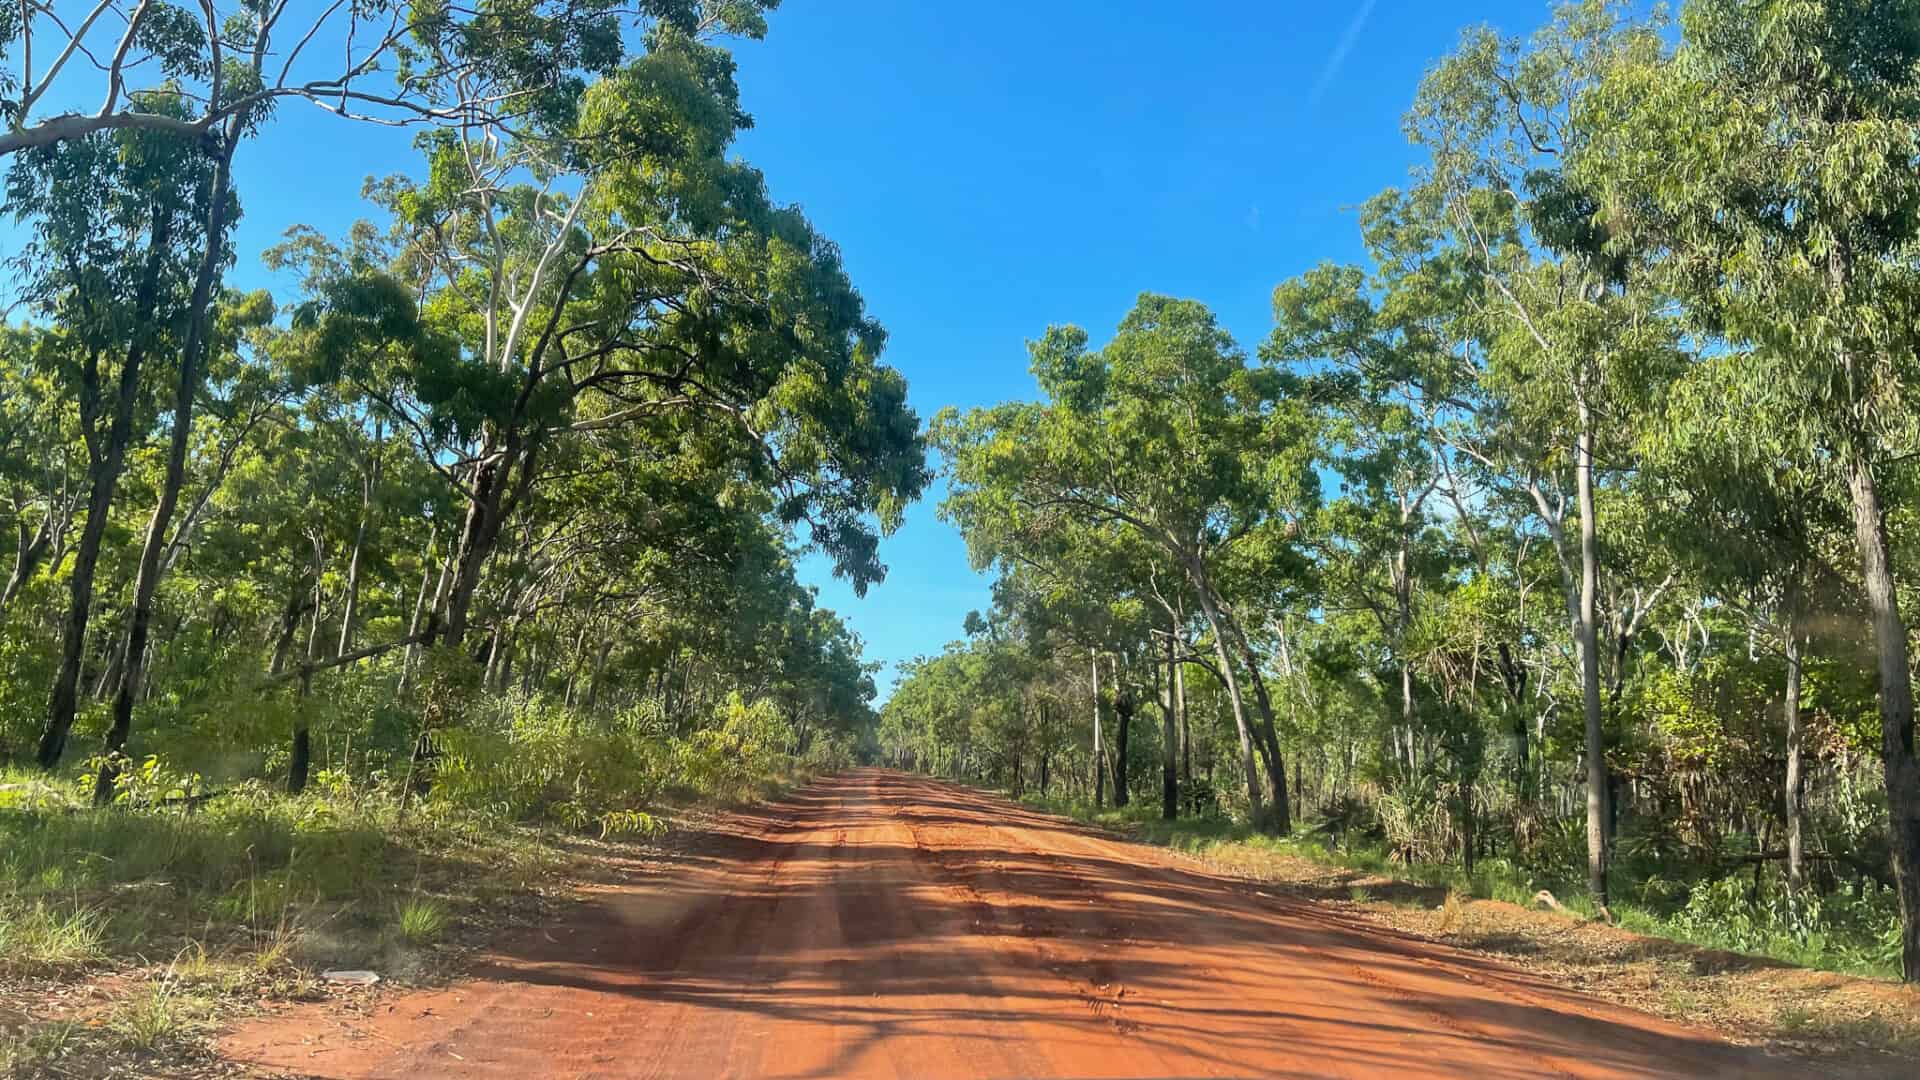 A long straight red dirt road, with green trees on either side.